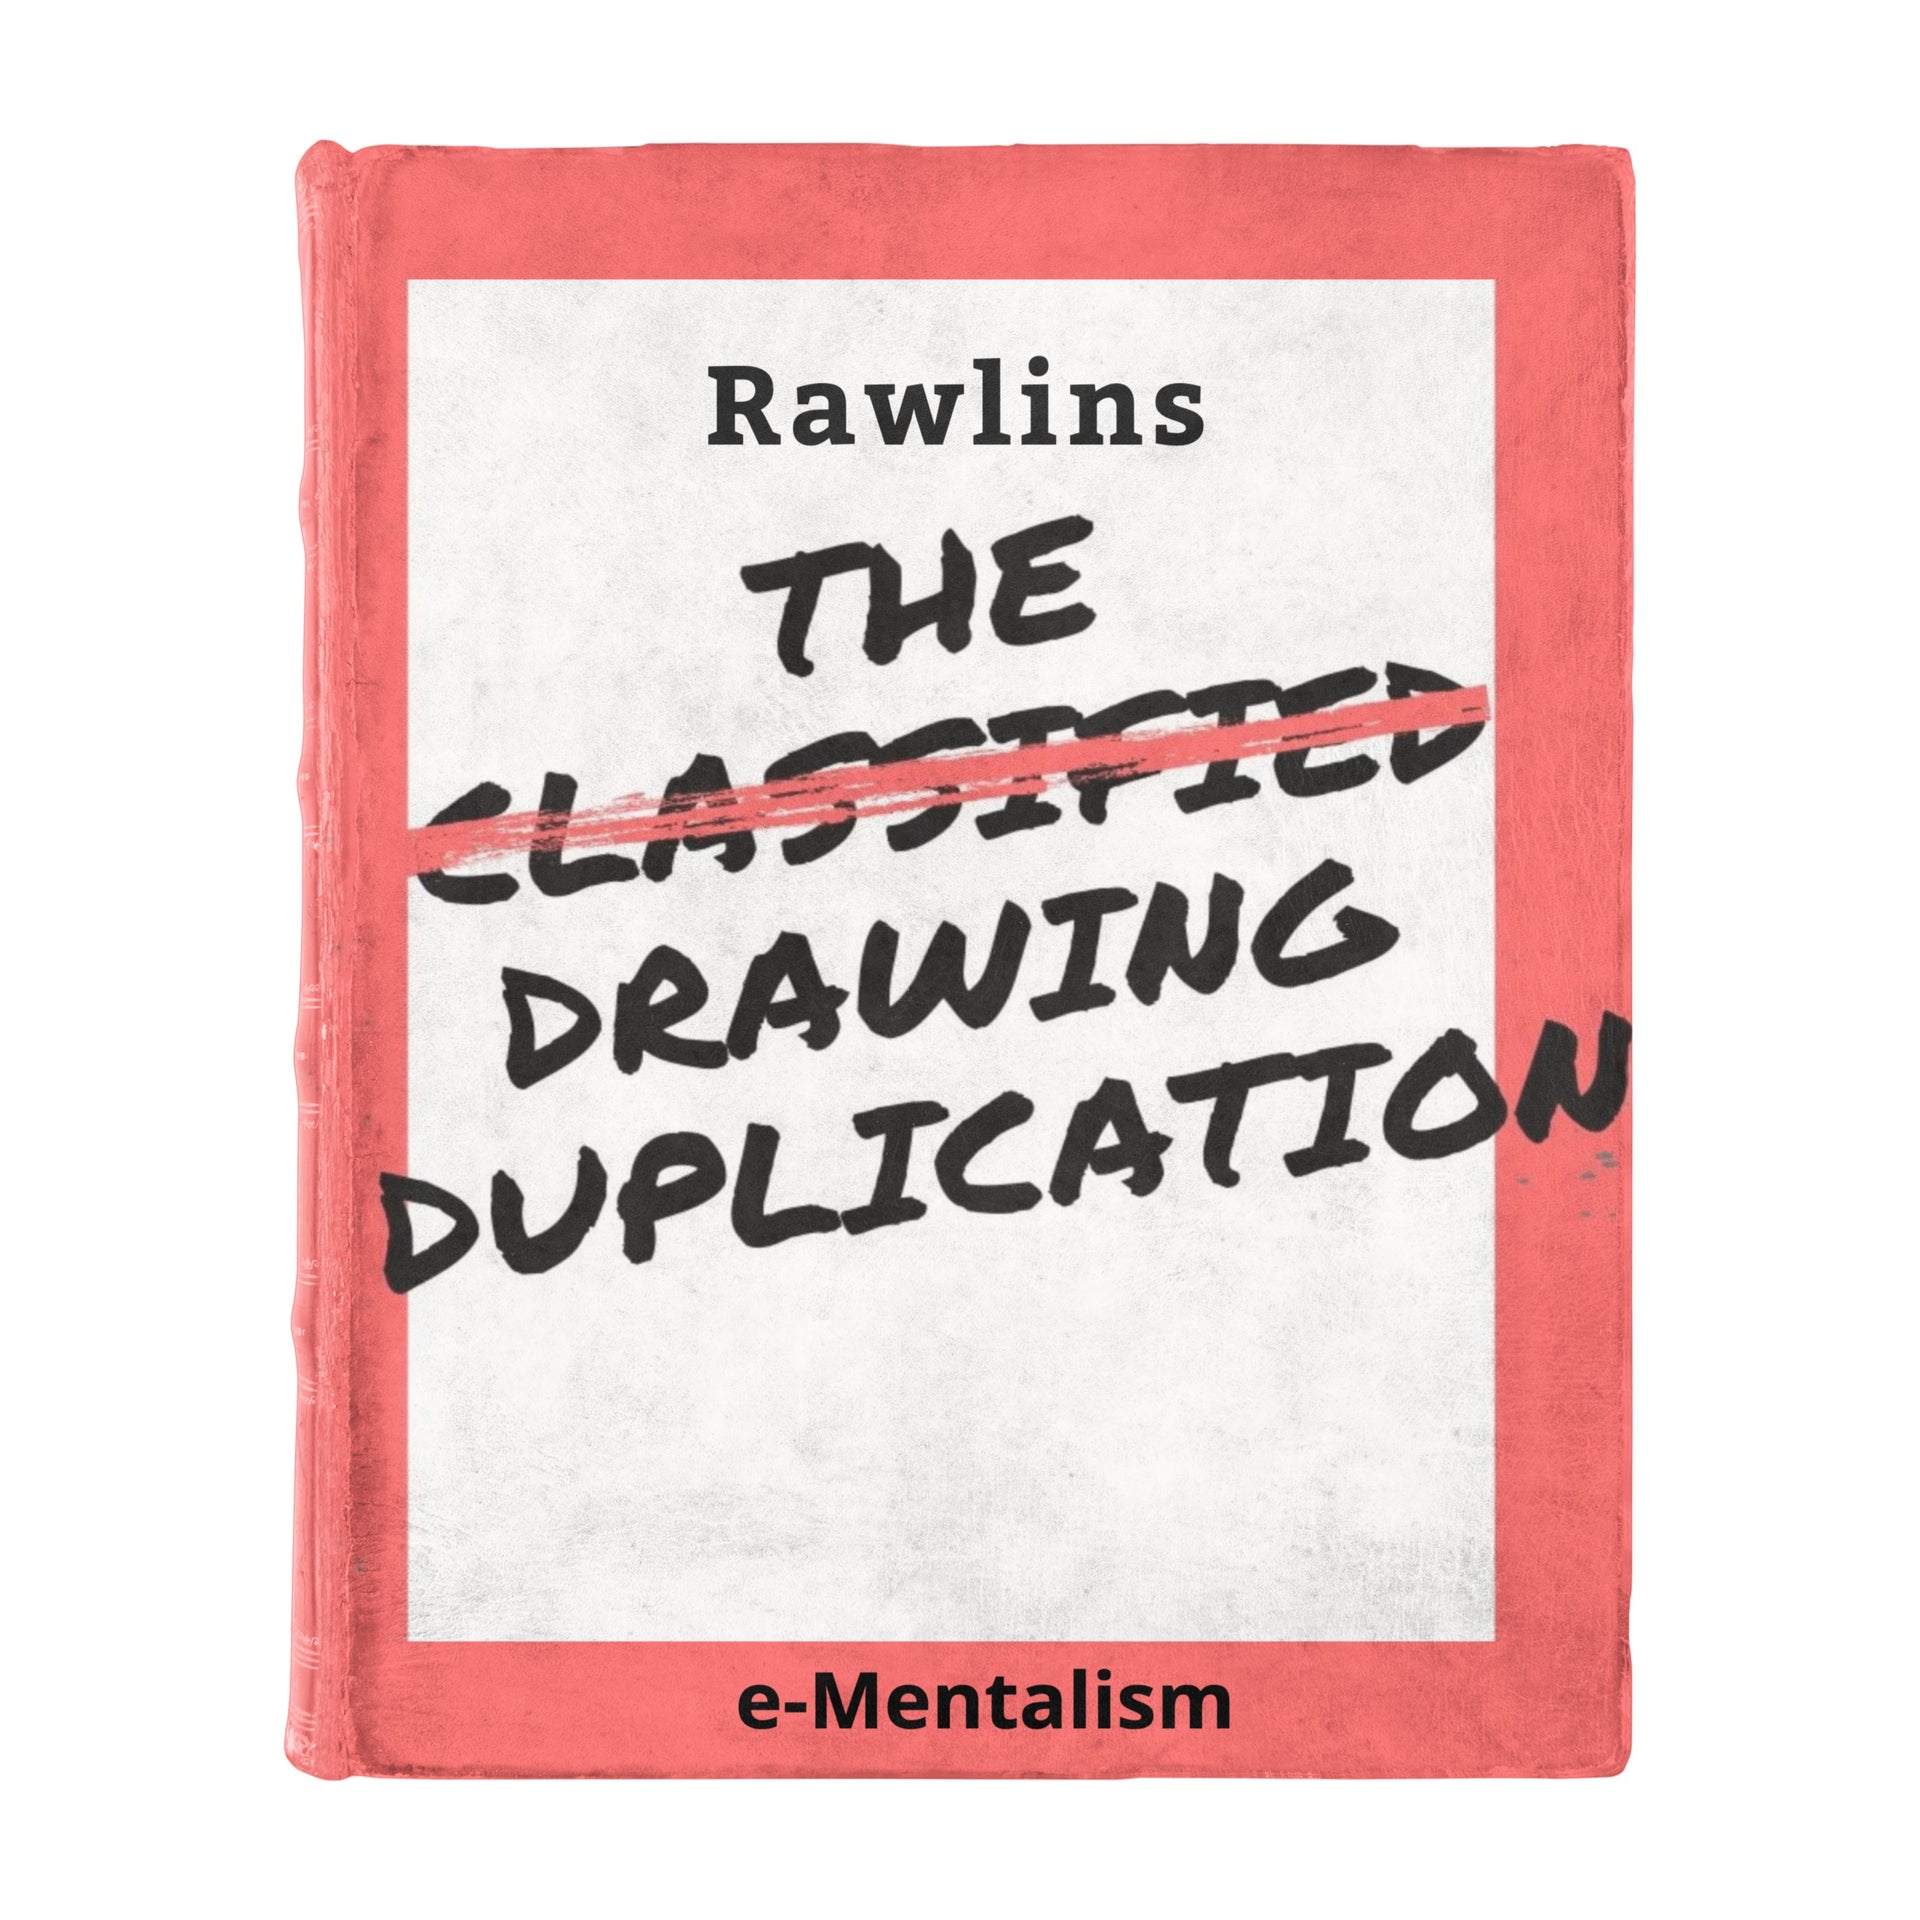 The Classified Drawing Duplication by Chris Rawlins (eBook) – e-Mentalism